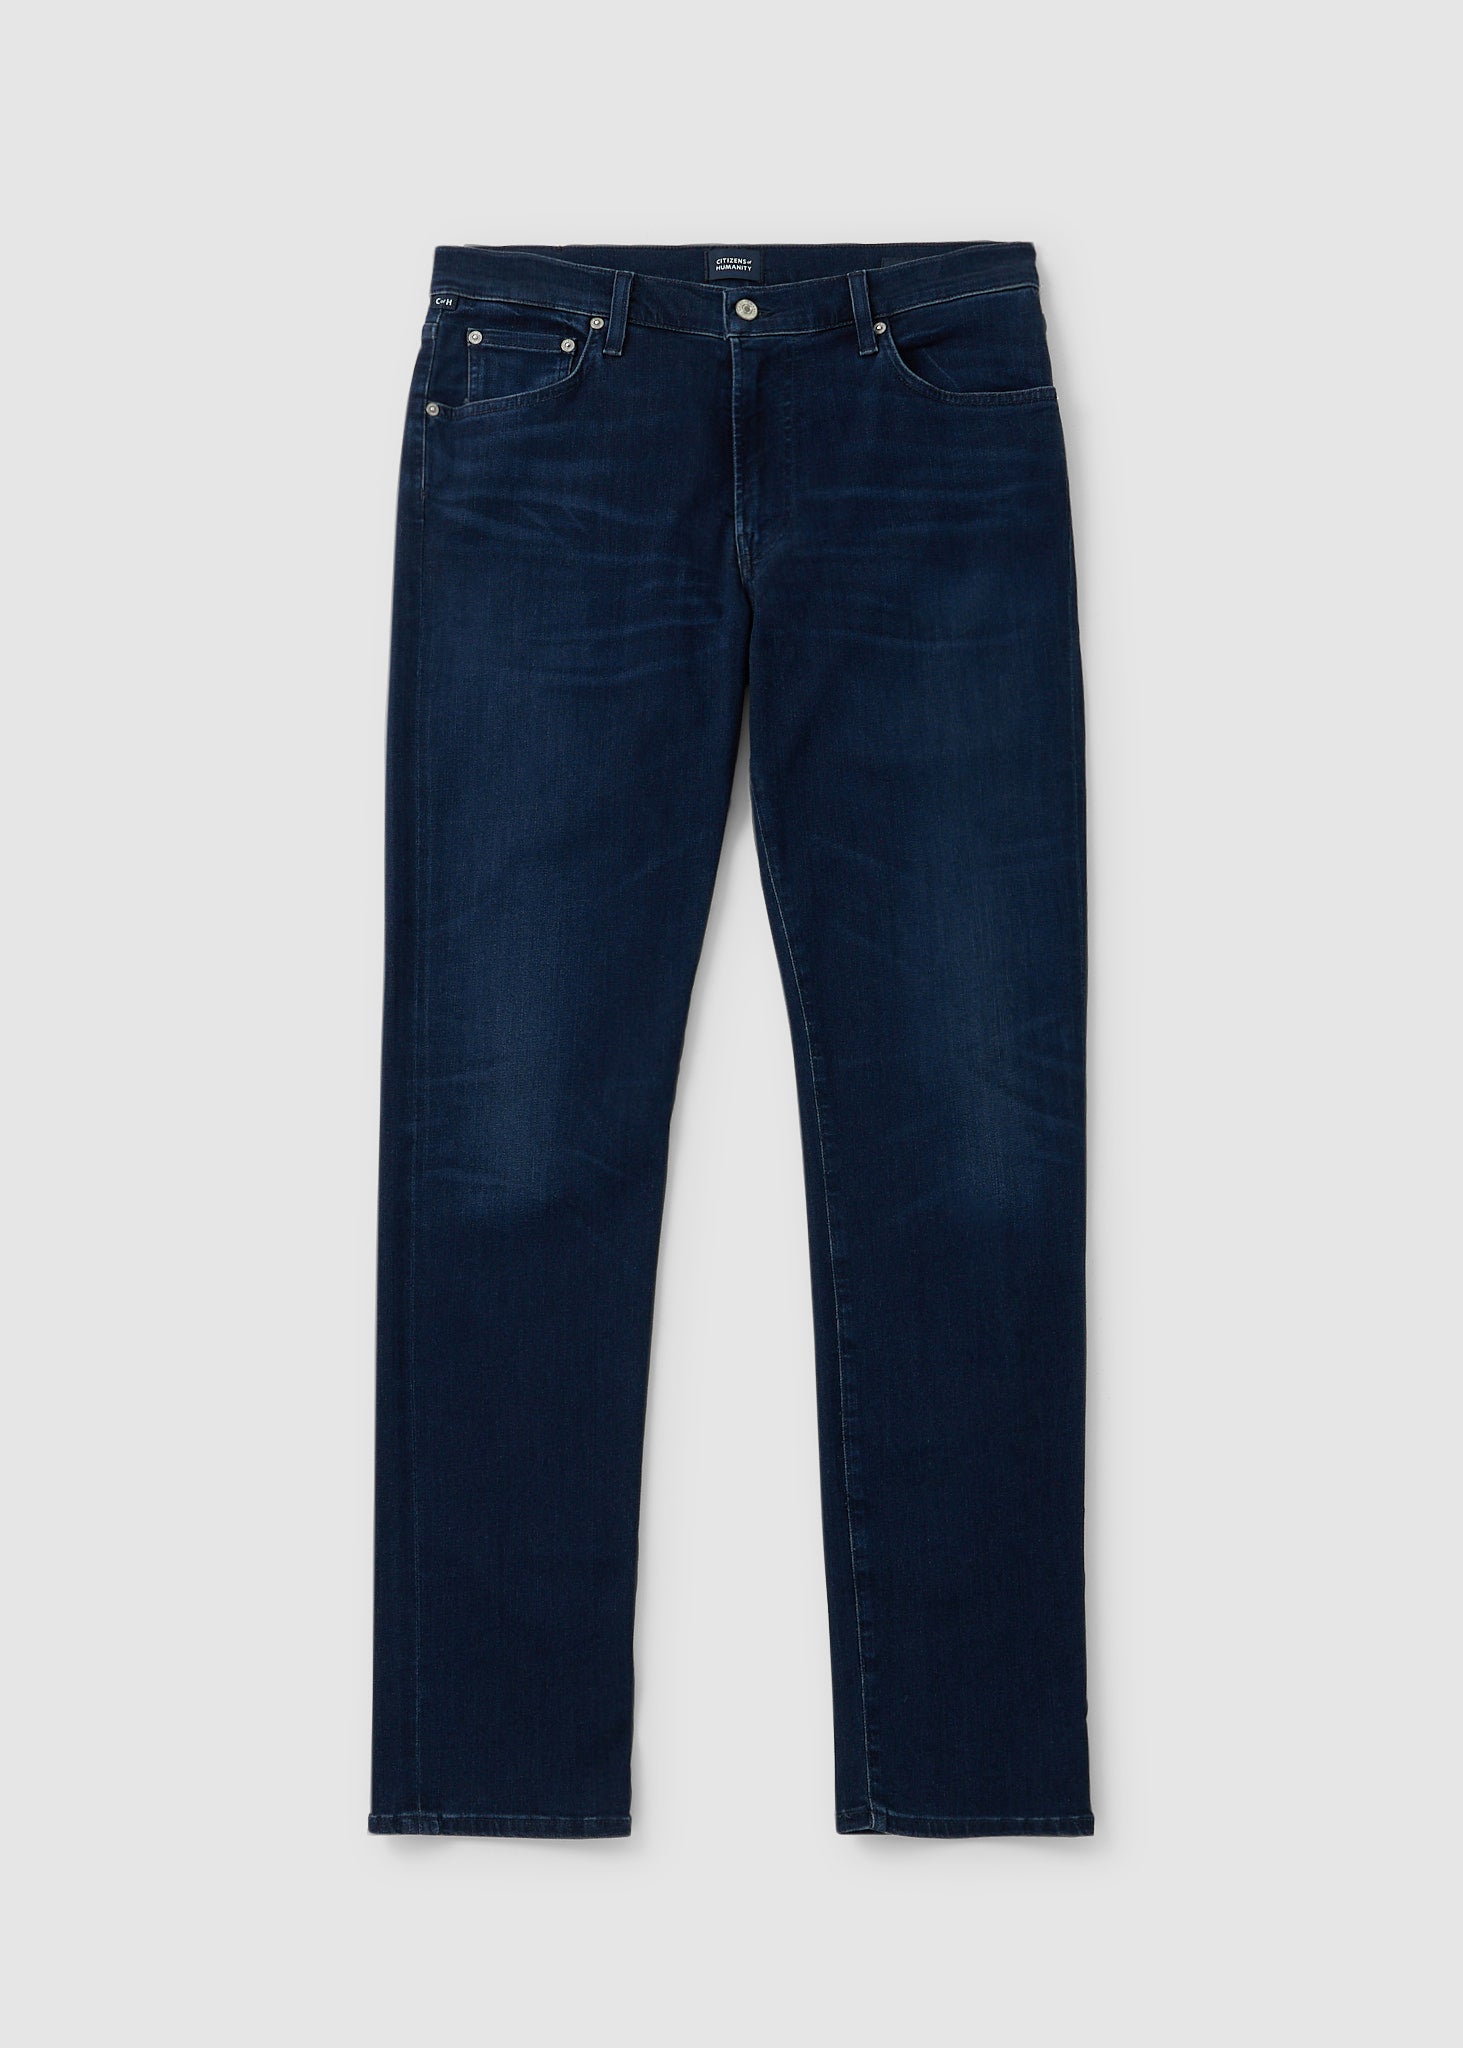 Citizens Of Humanity Mens Adler Tapered Classic Jeans